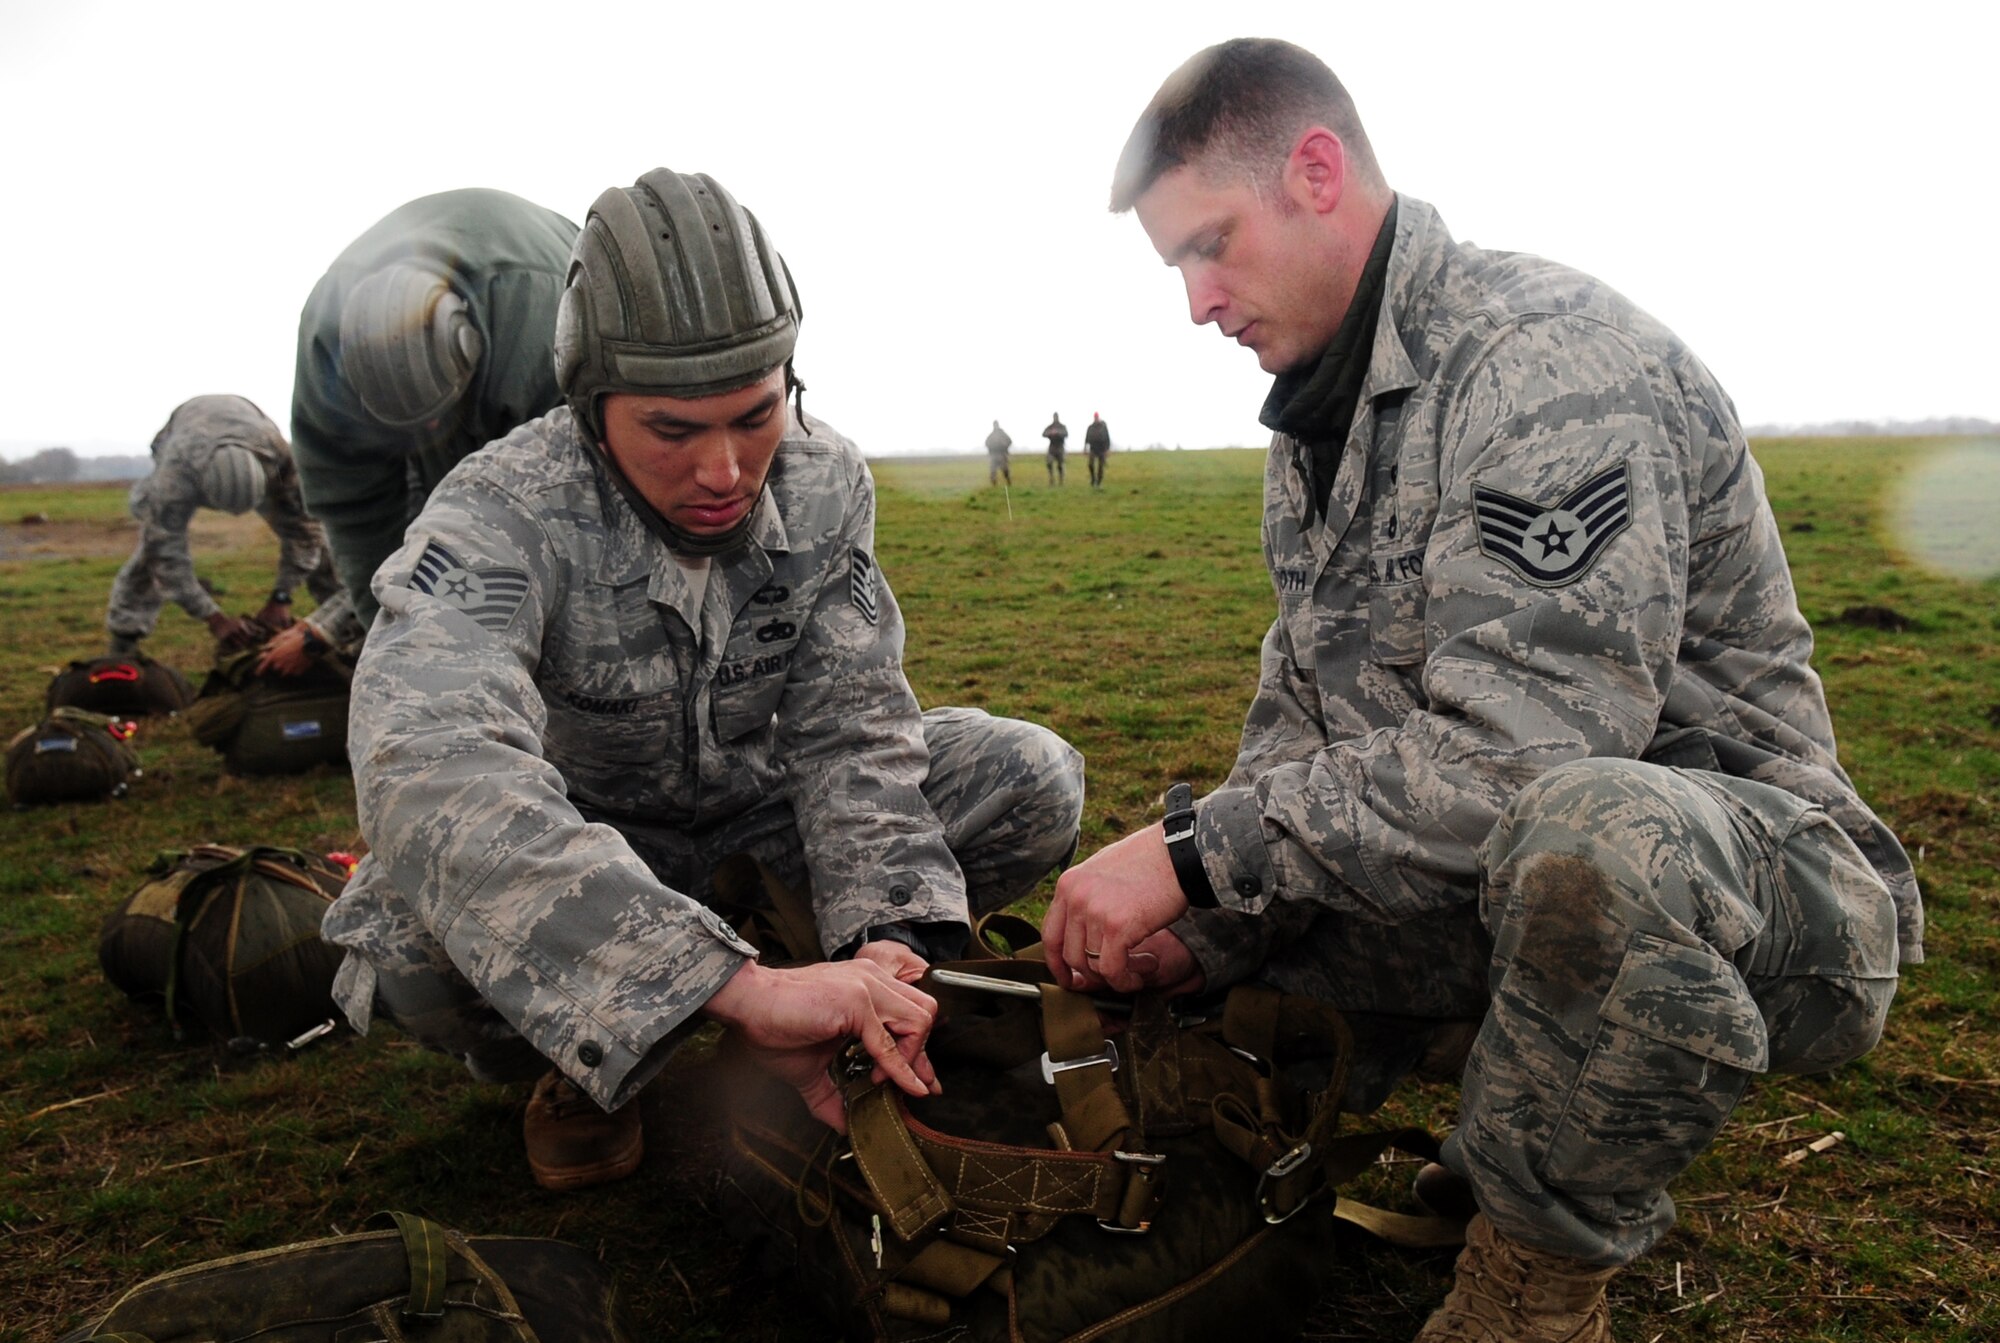 U.S. Air Force Tech. Sgt. Randal Komaki and Staff Sgt. Ronald Booth gather gear and prepare it for turn in after a multinational jump with the French paratroopers under French parachutes, March 4, 2010.  Members of the 435th Contingency Response Group and the 5th Quartermaster Company joined with their French military counterparts for a week of training at the École des troupes aéroportées (ETAP), or School of Airborne Troops, a military school dedicated to training the military paratroopers   of the French army, located in the town of Pau, in the département  of Pyrénées-Atlantiques , France.  The ETAP is responsible for training paratroopers, and for international cooperation and promotion of paratroop culture. (U.S. Air Force Photo by Staff Sgt. Jocelyn Rich)